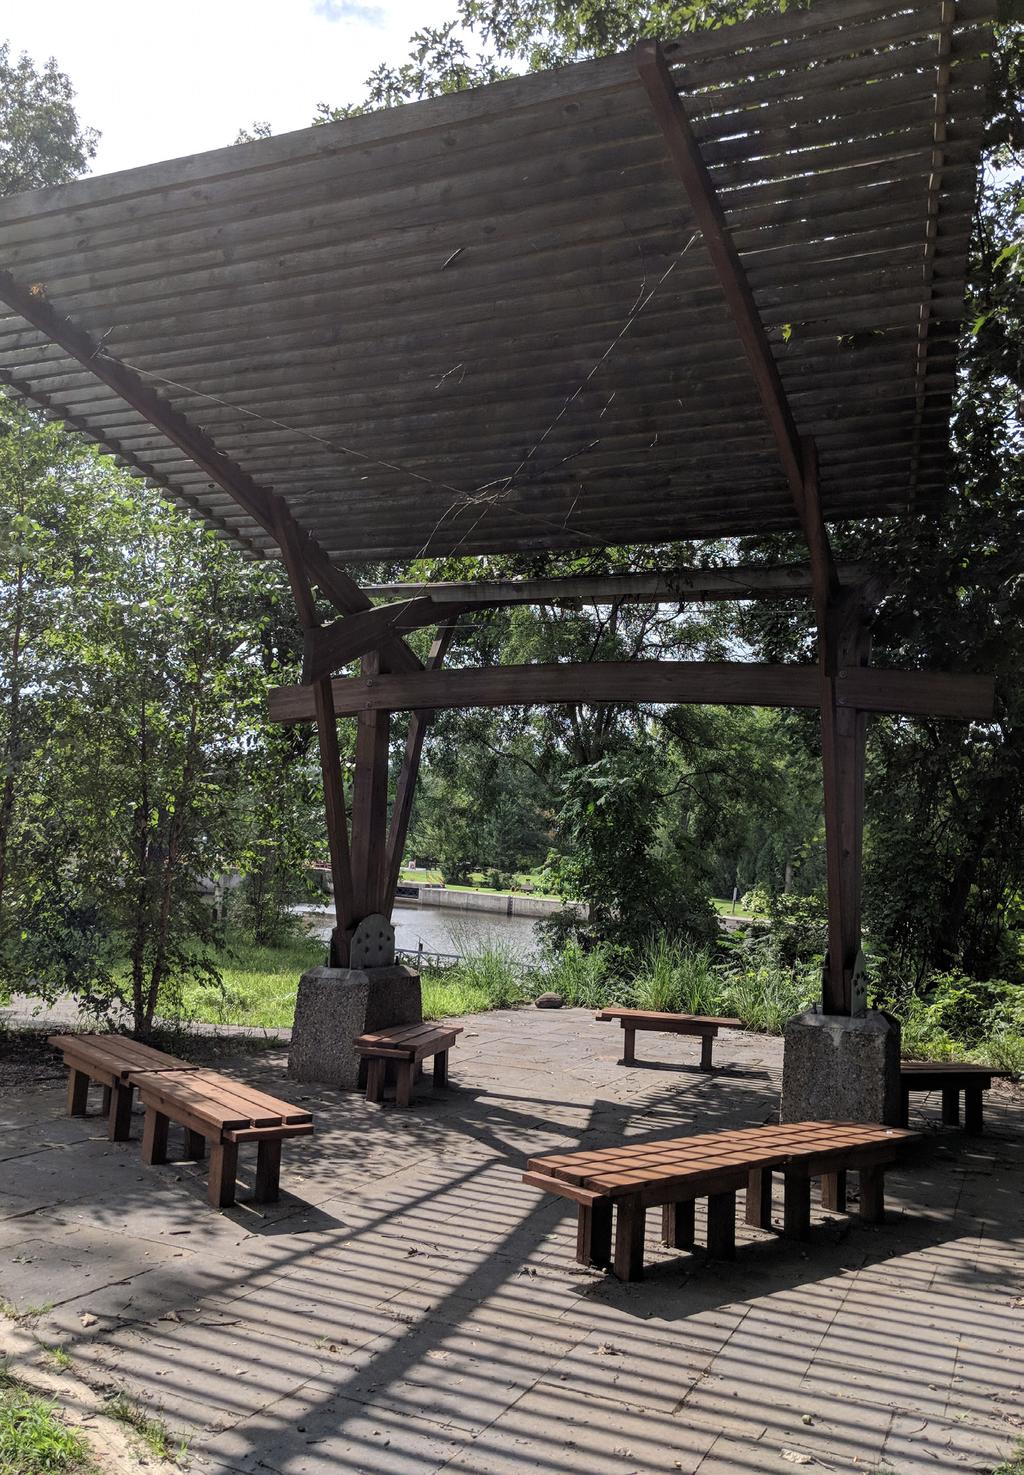 SHADE STRUCTURE AT